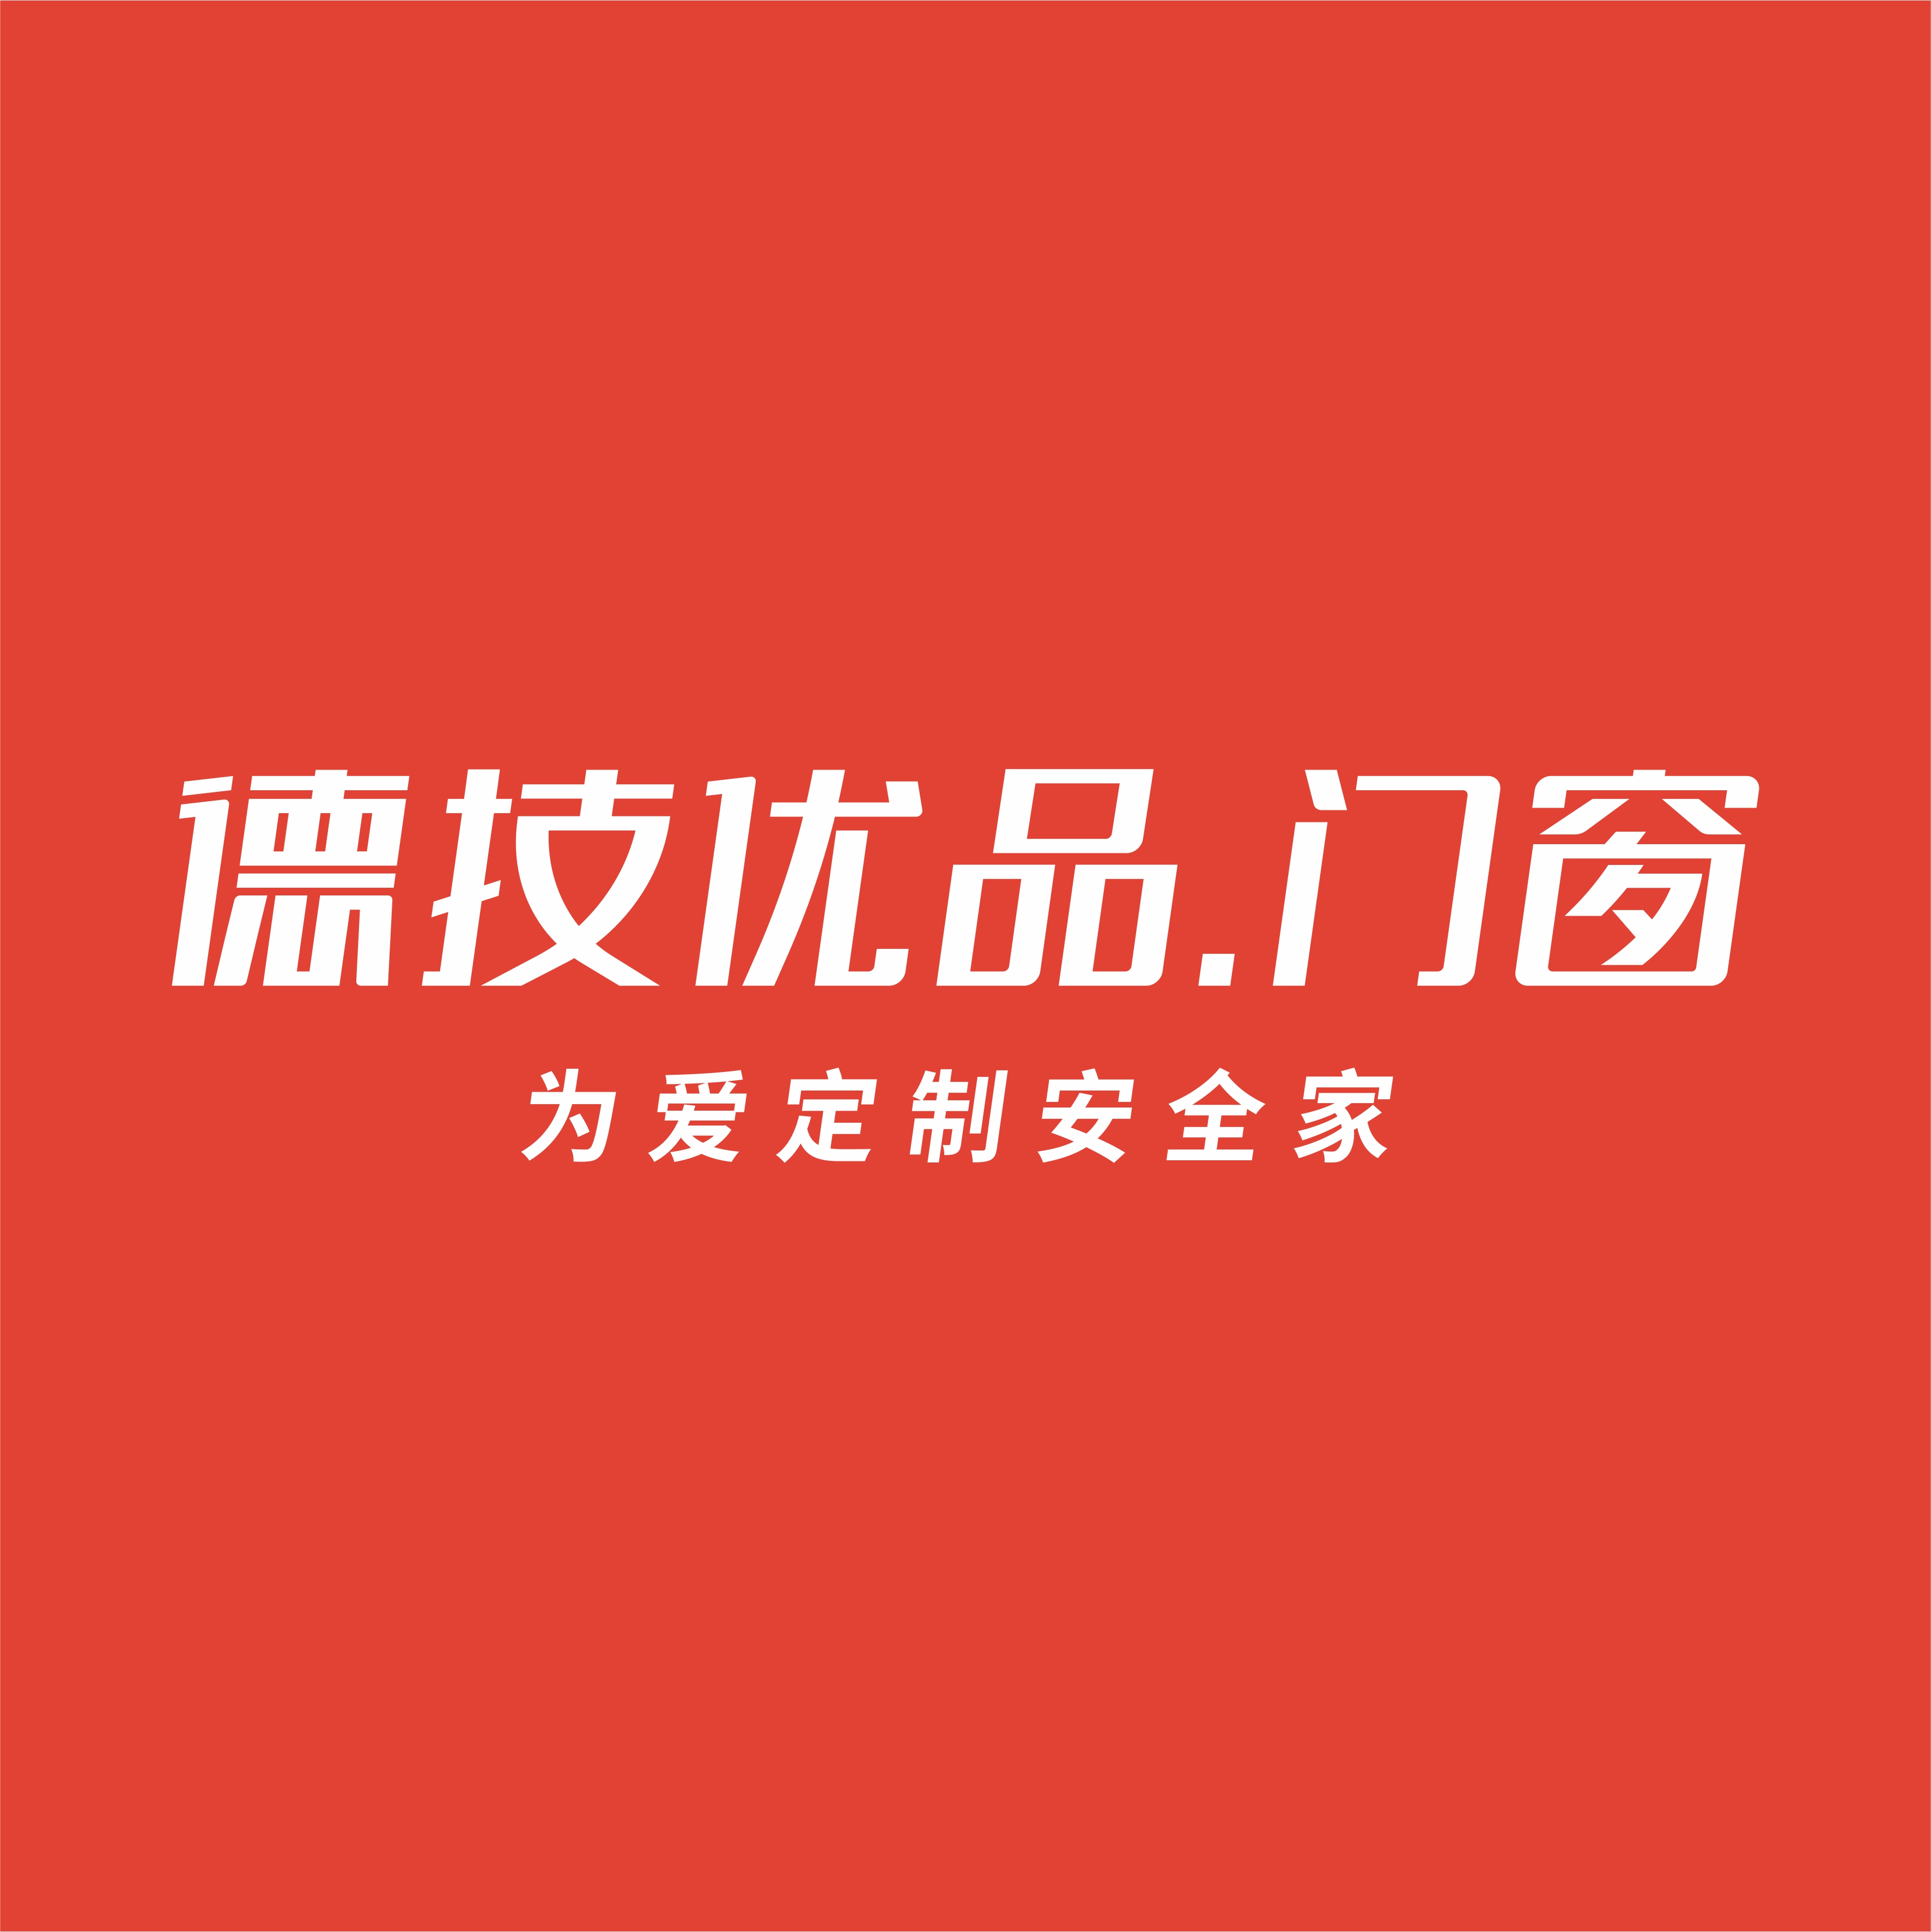 <font color='red'>门窗</font>十大<font color='red'>品牌</font>怎么选加盟有优势？